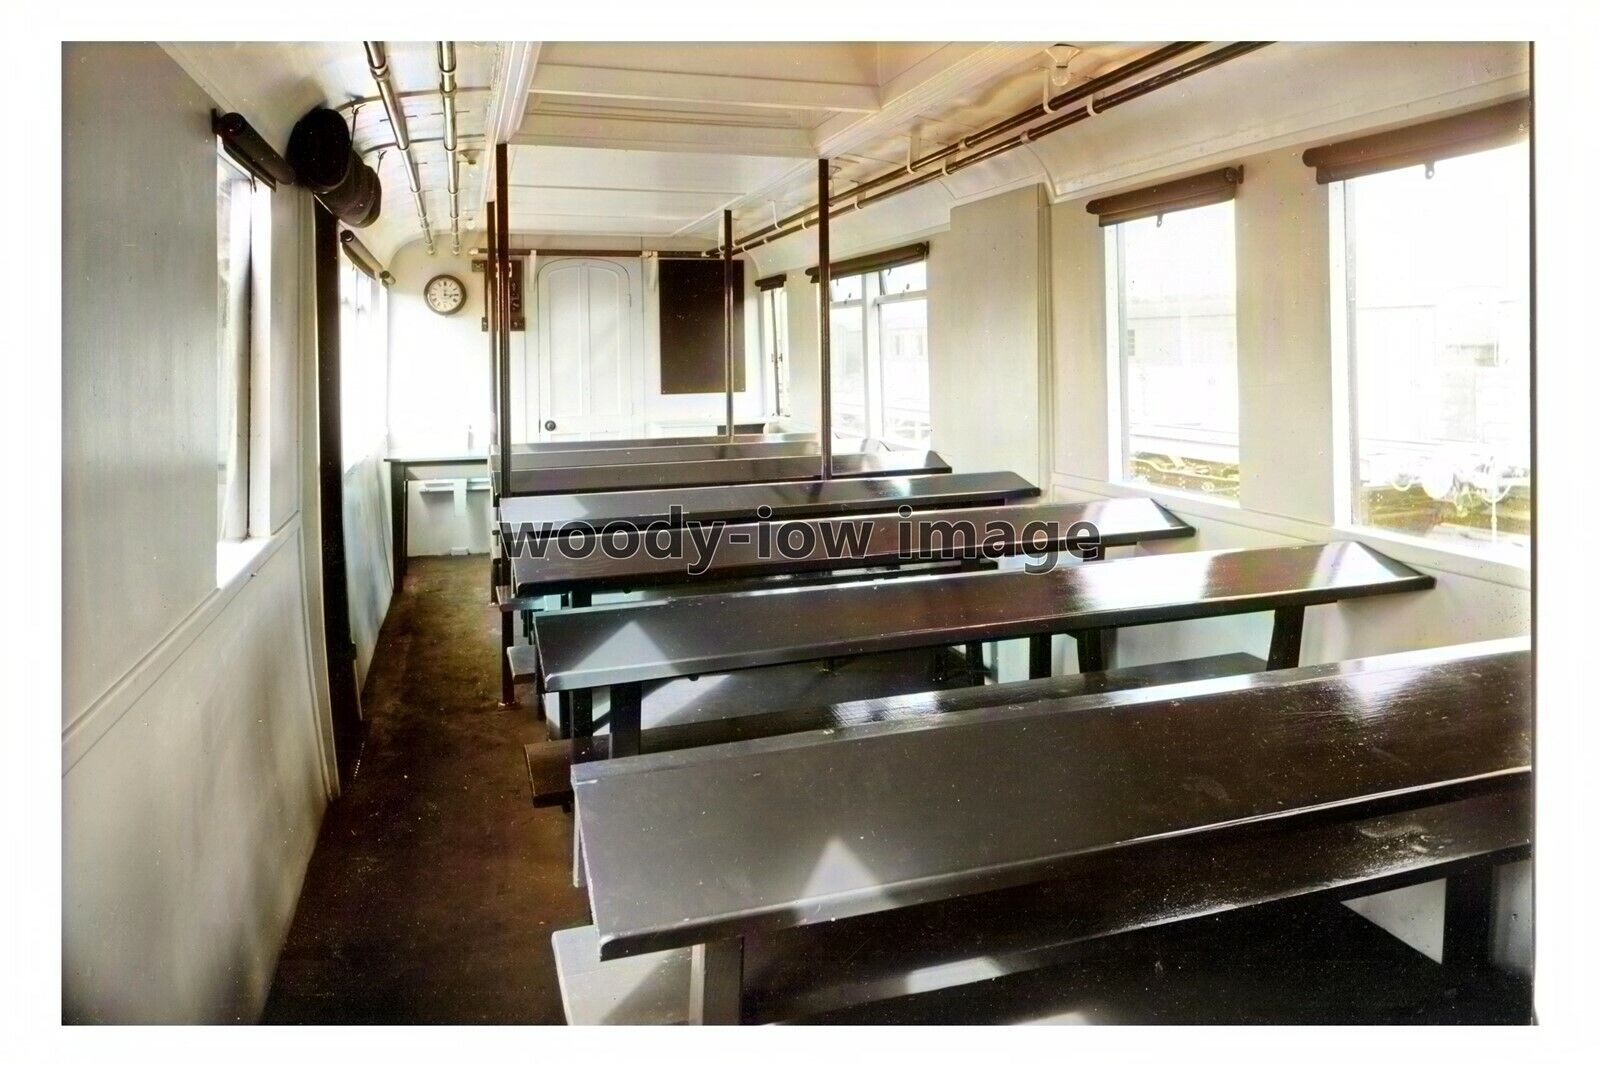 bbc0264 - Railway - An A R P Instruction Van Lecture Room in 2010 - print 6x4